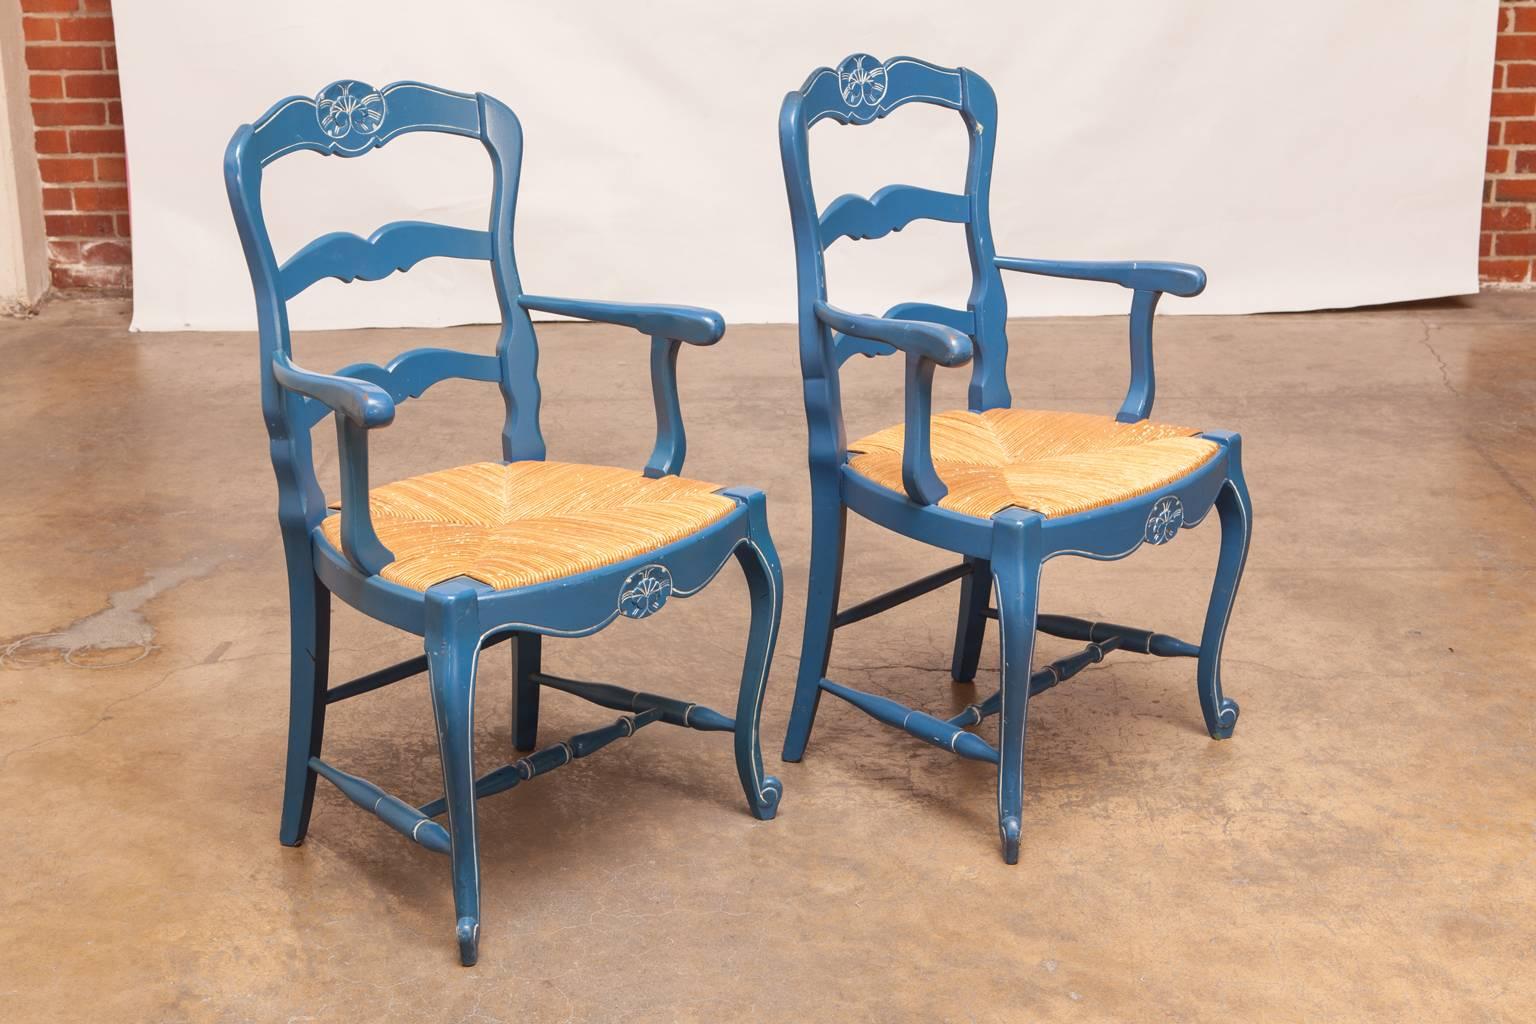 Colorful vintage carved armchairs featuring a rush bottom seat and a French blue lacquer finish. Each ladderback chair has white accent stripes and a bee motif crest. Supported by cabriole legs with scrolled feet. Made with generous proportions.